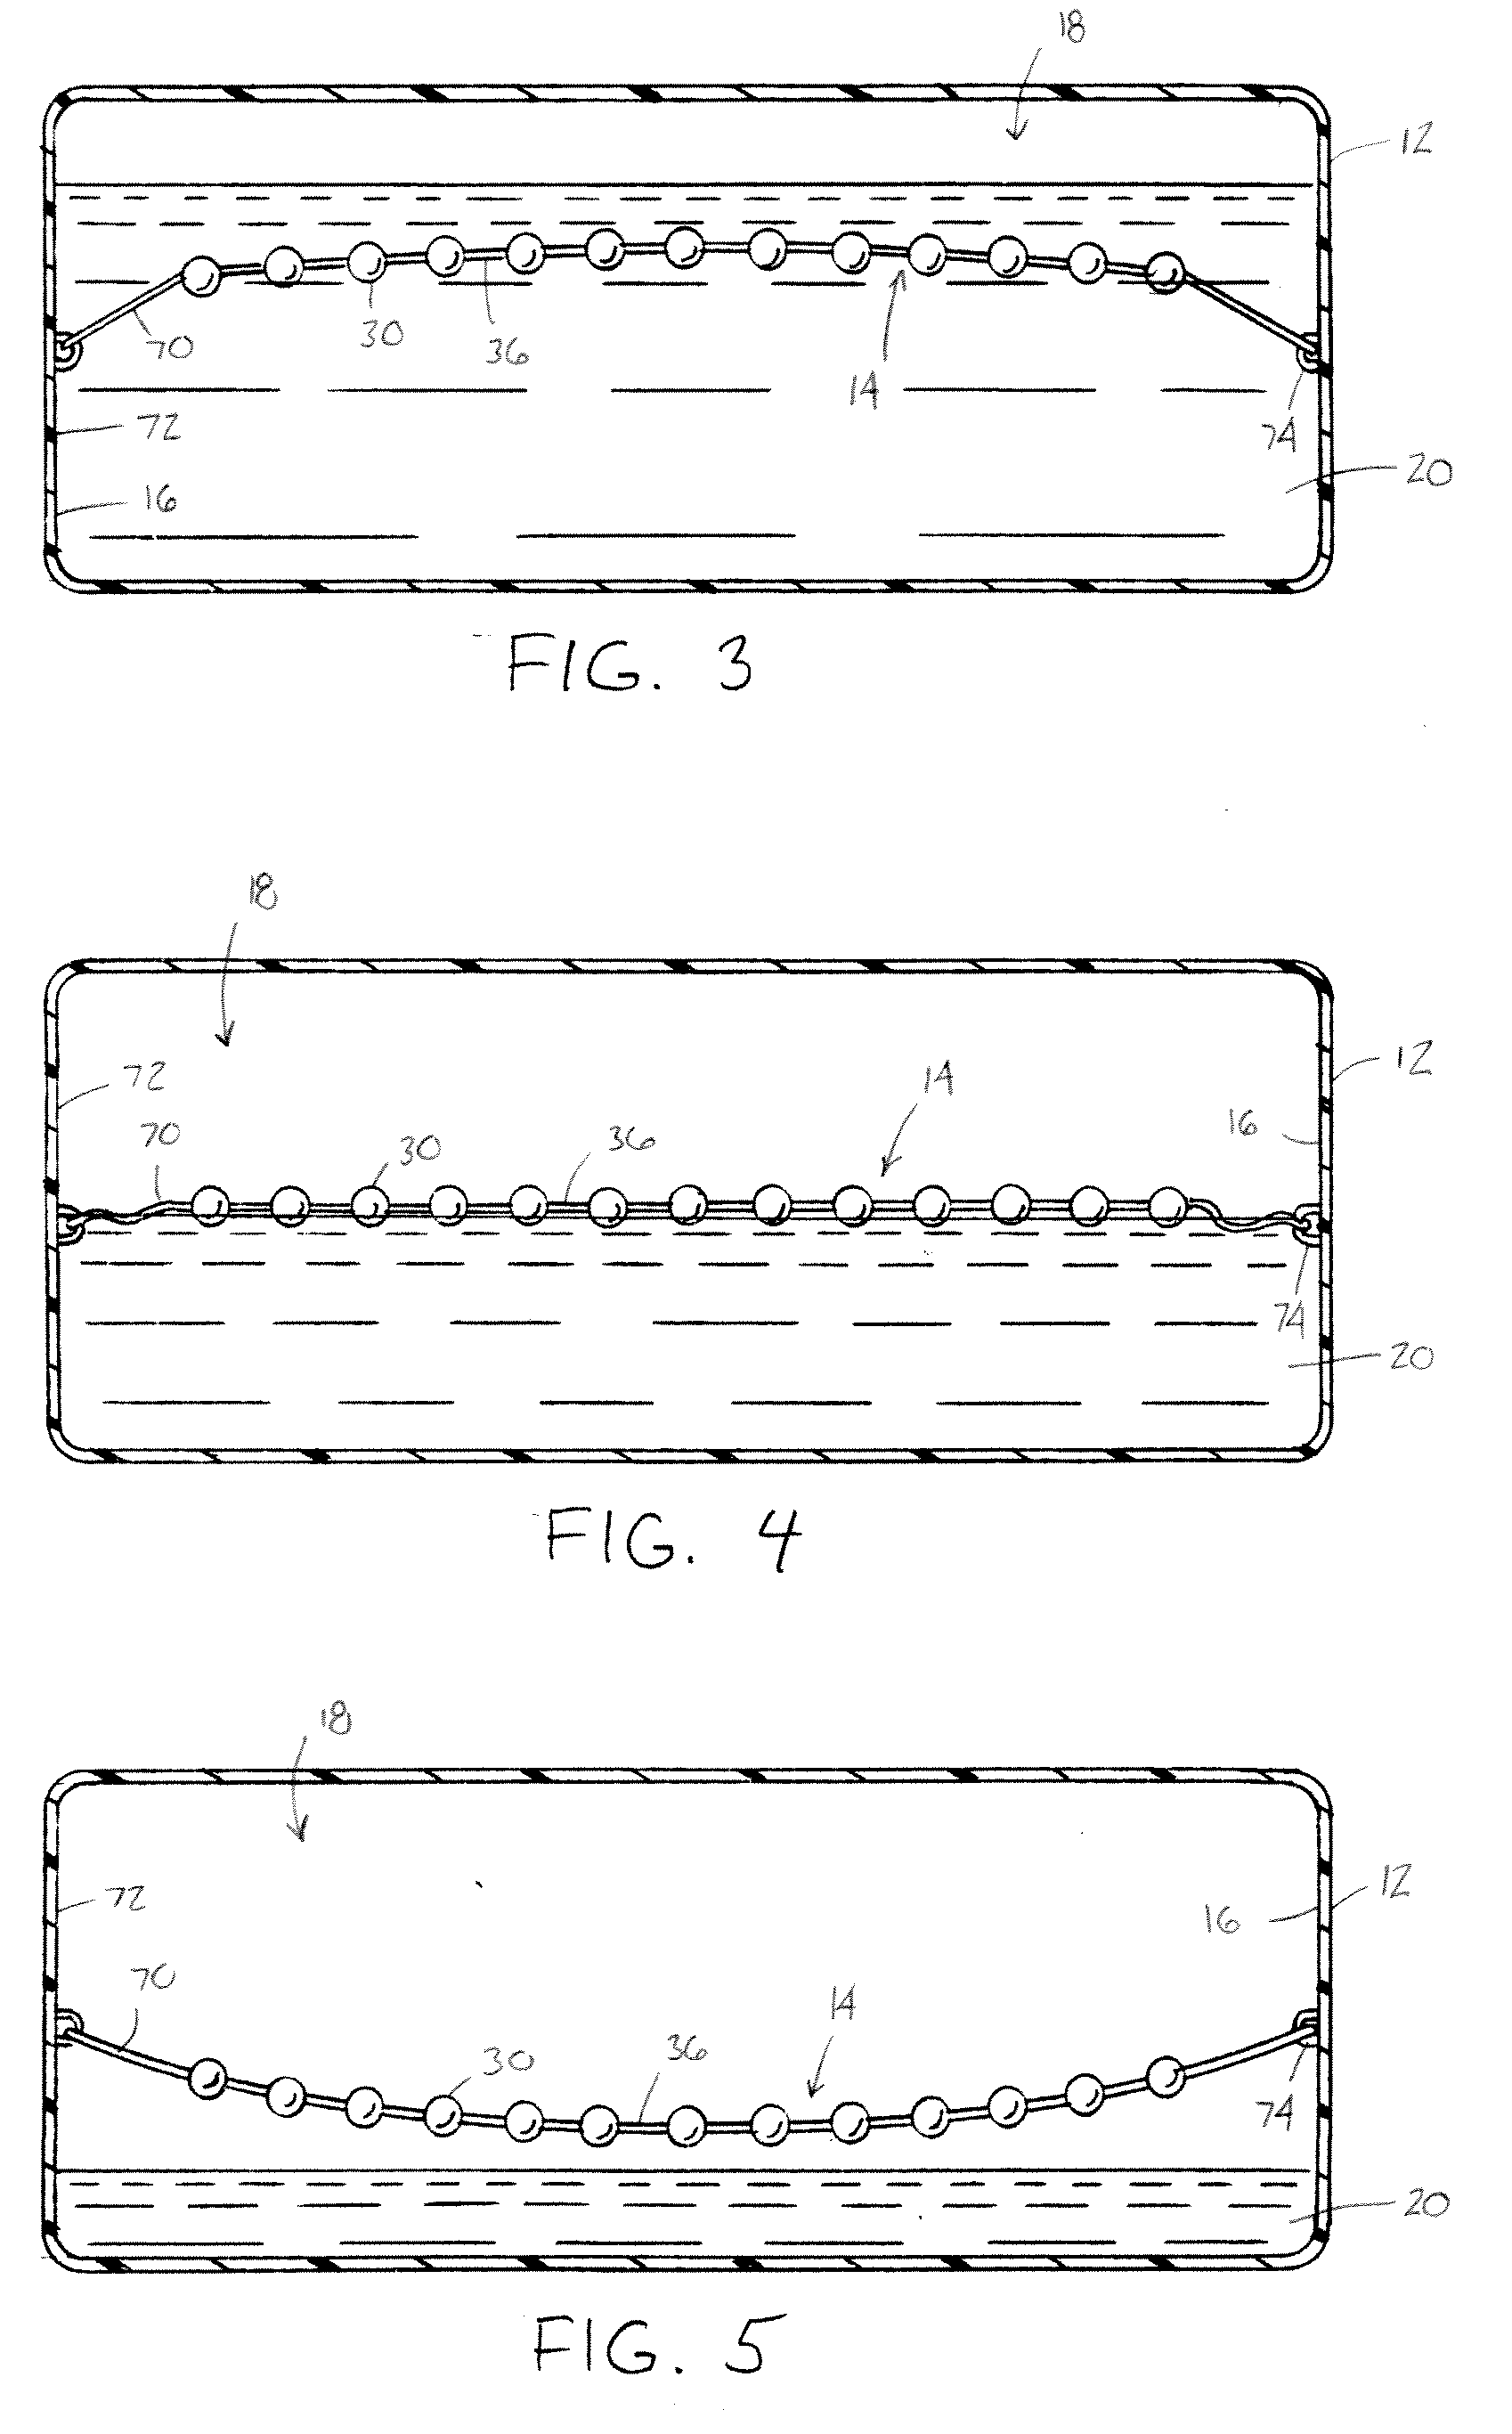 Floating Absorber Assembly for Reduced Fuel Slosh Noise